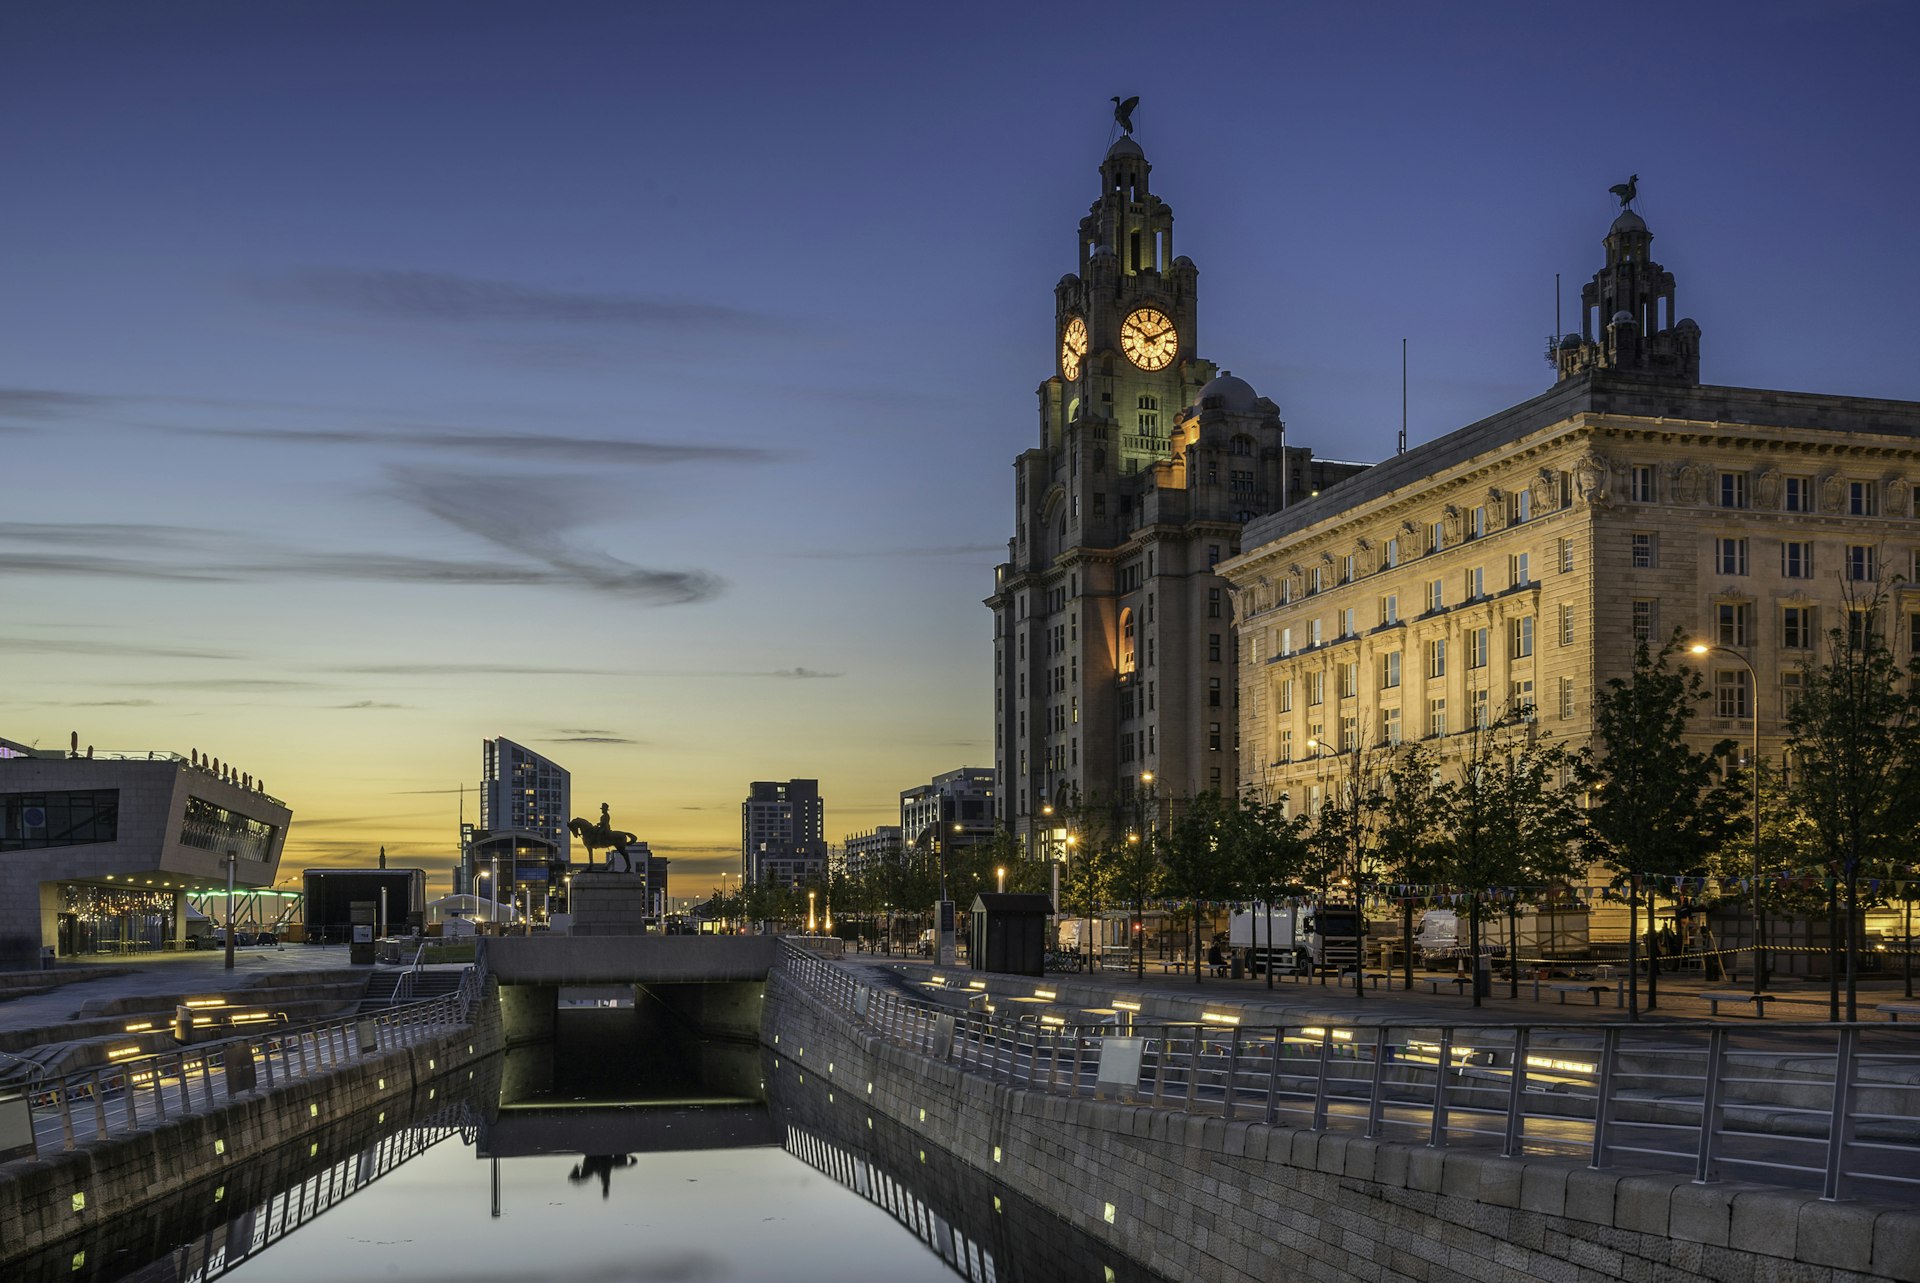 Dusk sky and The Three Graces which compromises the Liver Building, the Cunard and Port Authority 